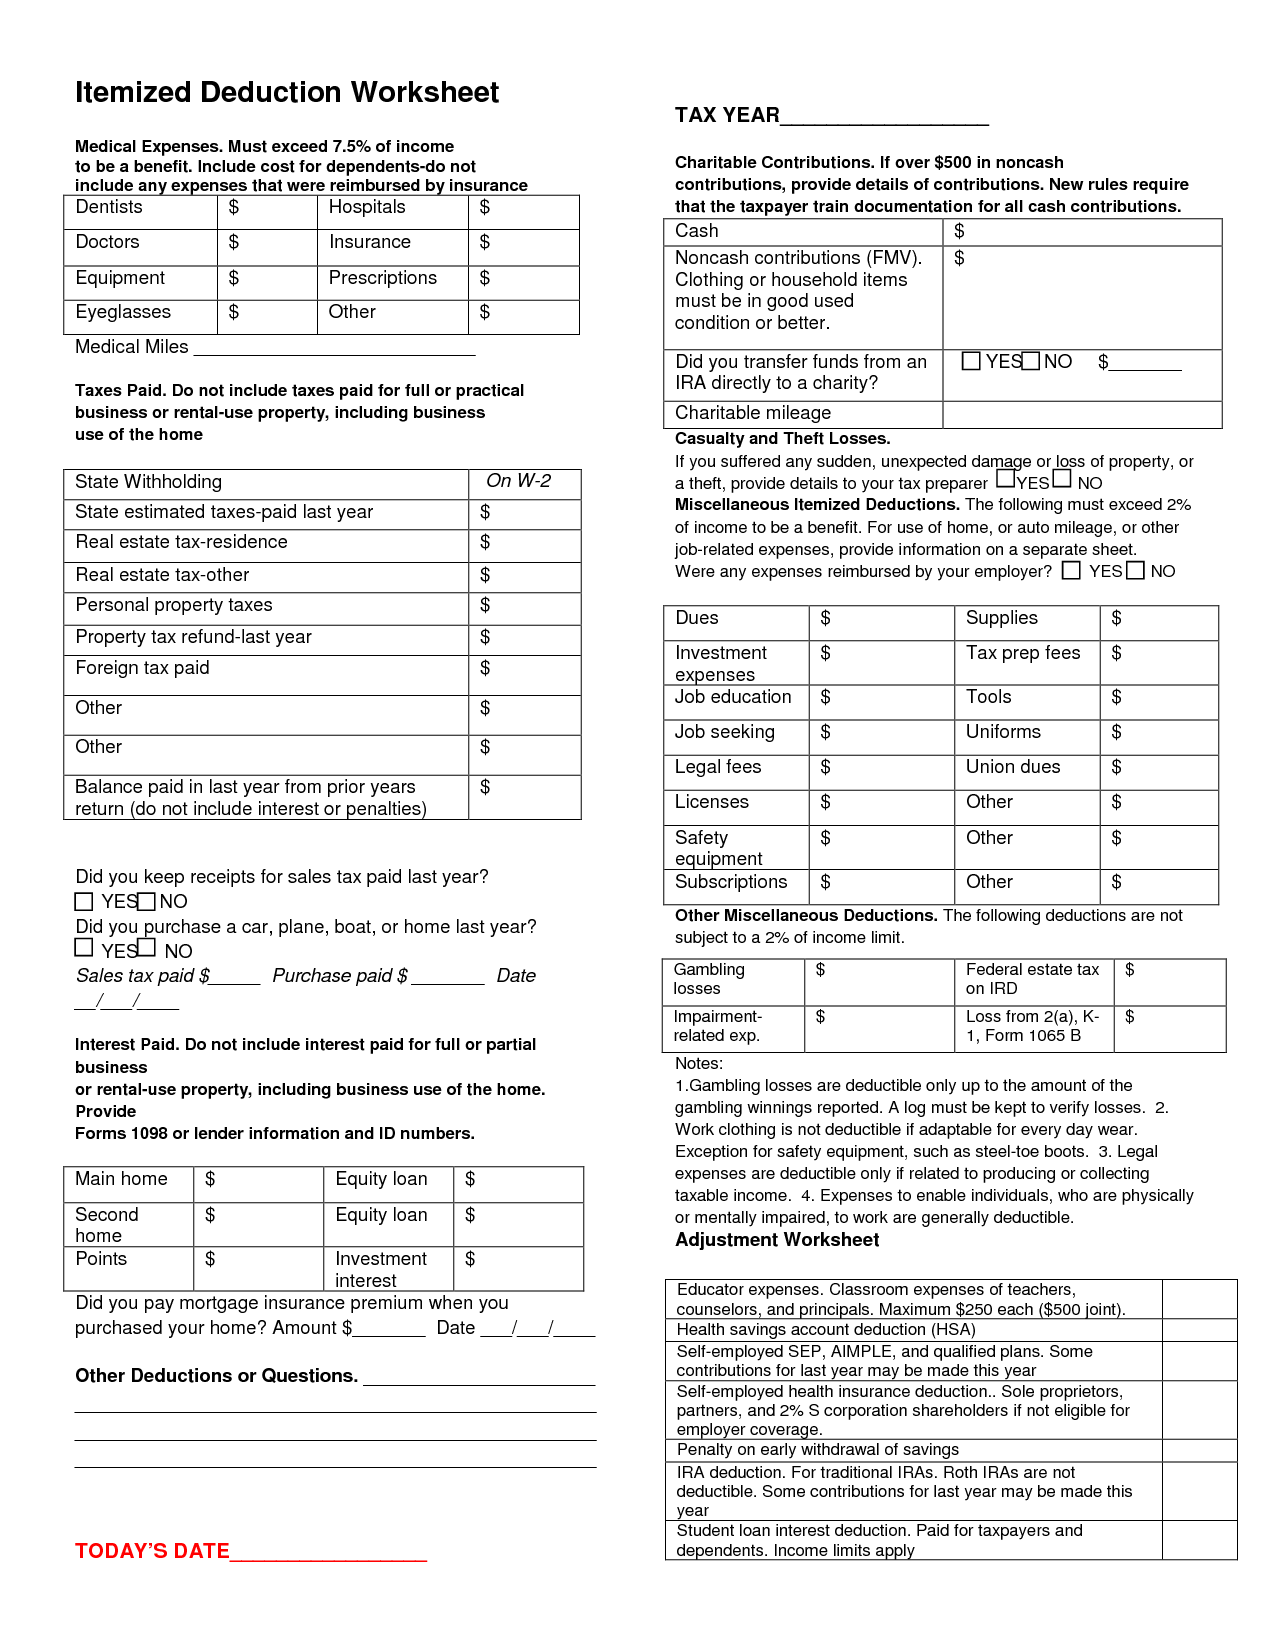 18 Best Images of Itemized Deductions Worksheet Printable  Itemized Deductions Worksheet, 2014 